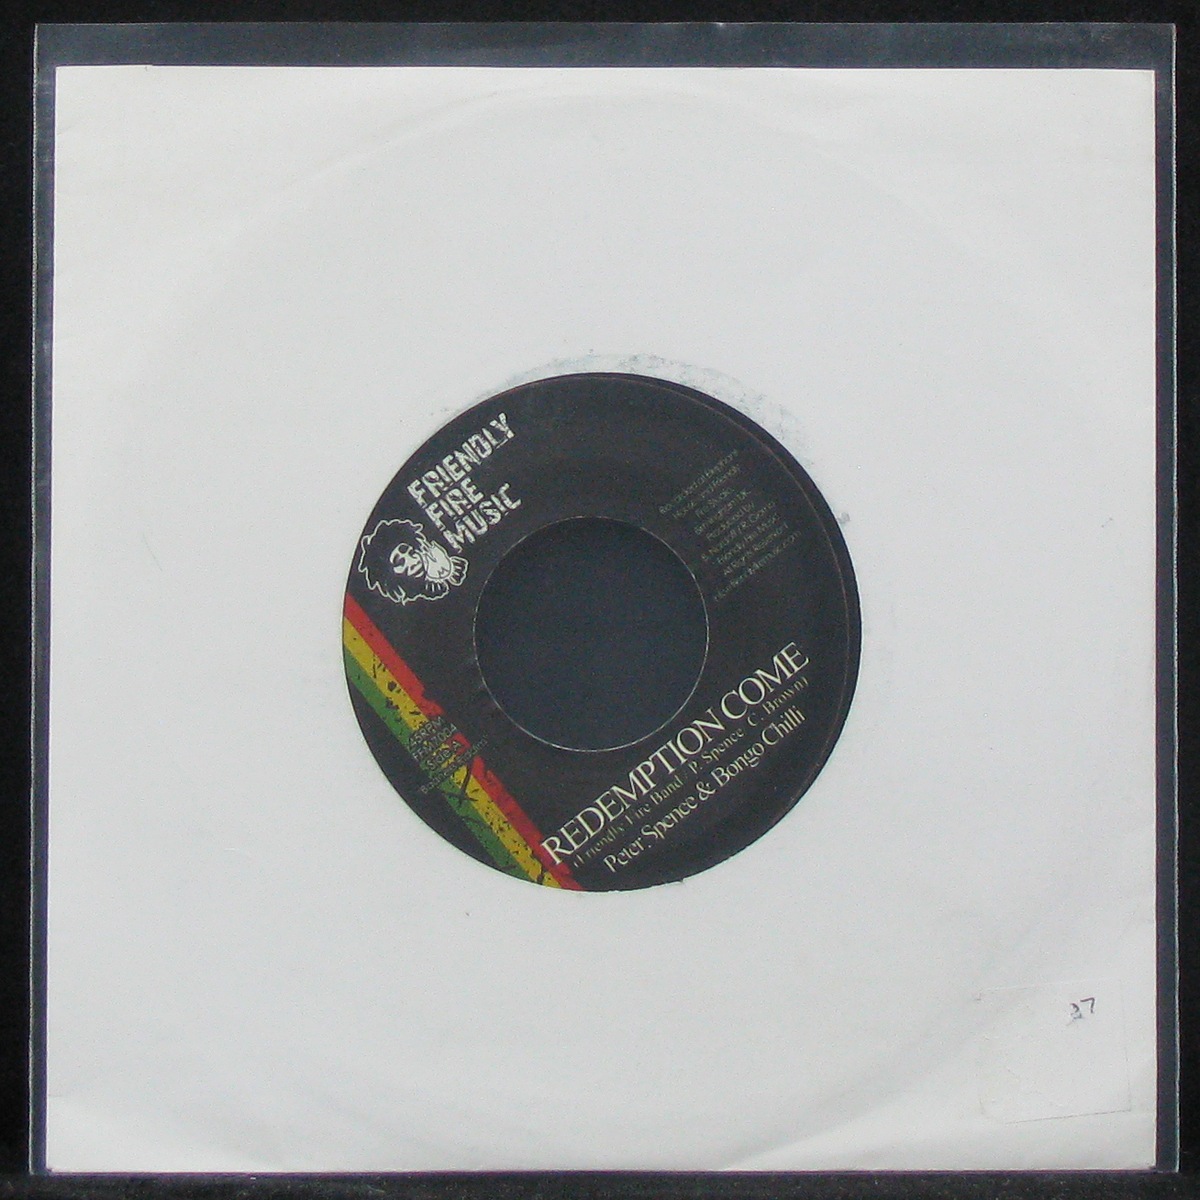 LP Peter Spence & Bongo Chilli / Collie Weed — Redemption Come / Never Change (single) фото